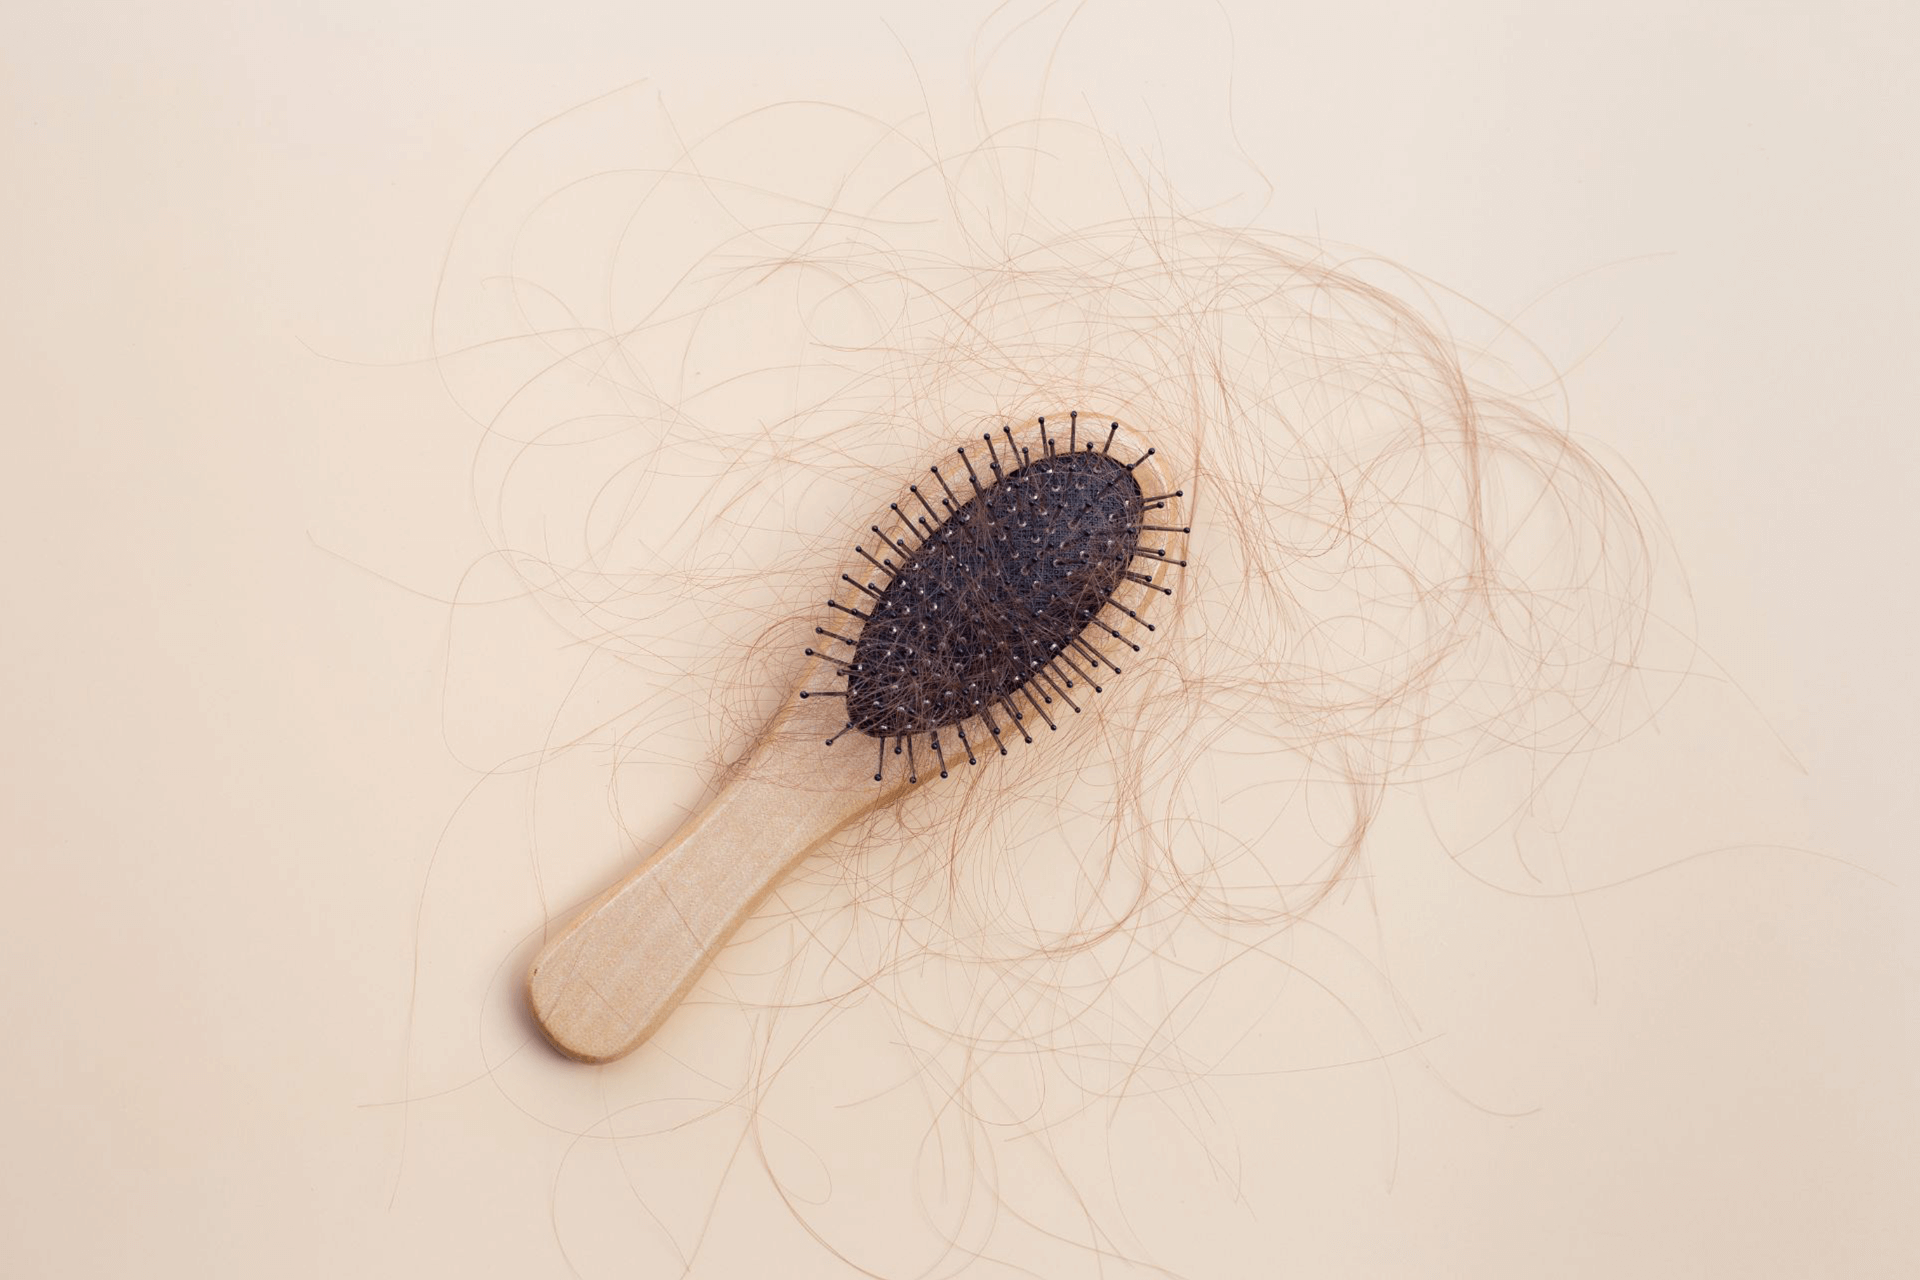  A hairbrush with large clumps of hair stuck to the bristles 